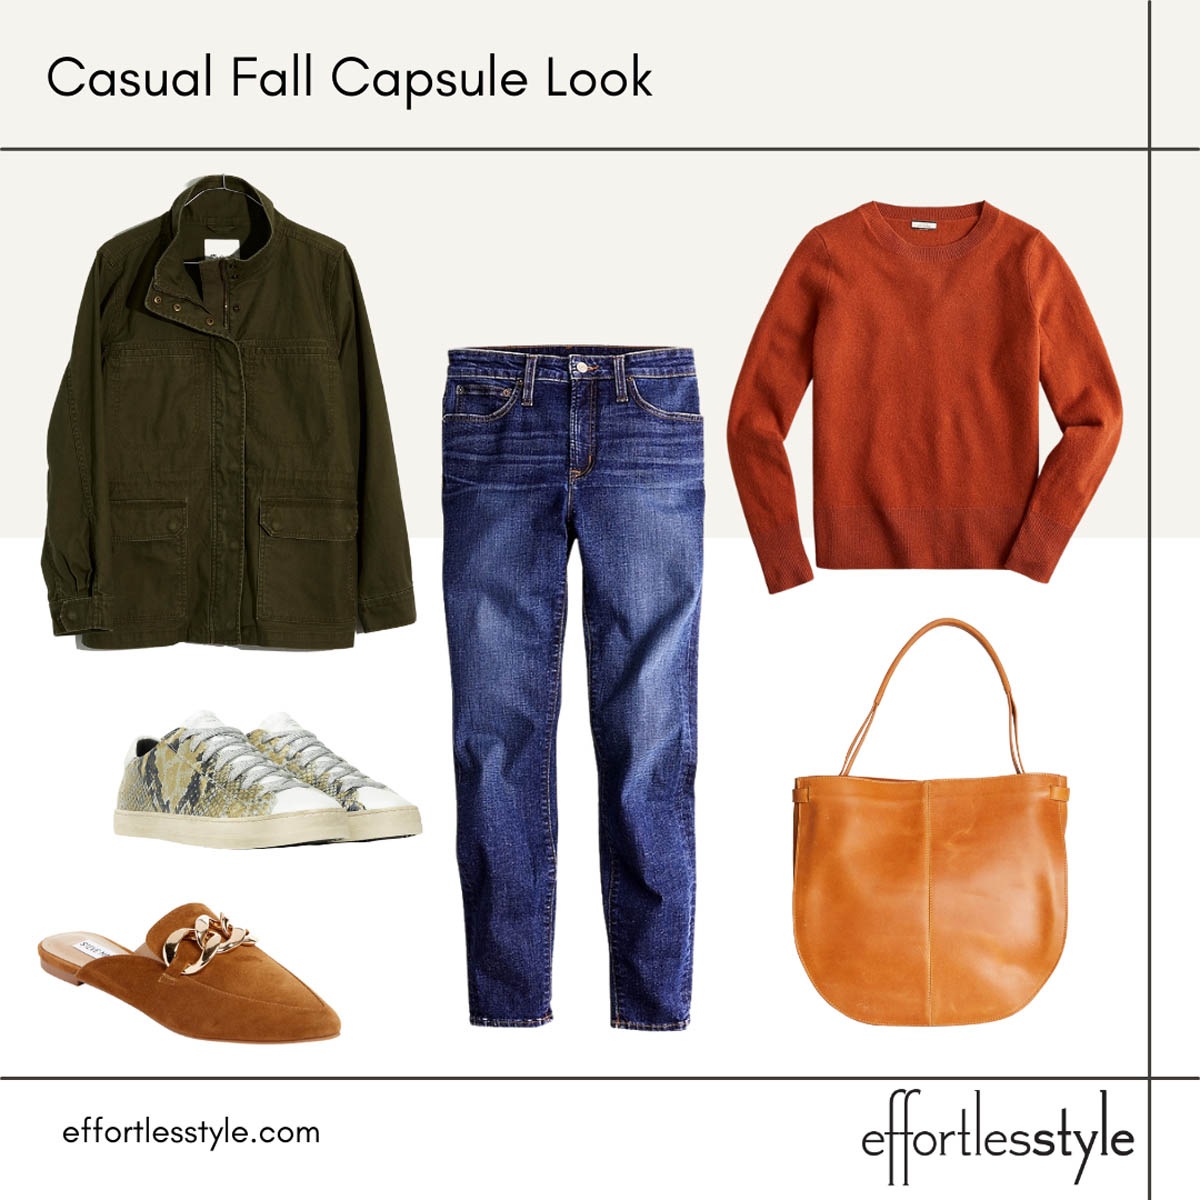 Fall Capsule Wardrobe Looks Utility Jacket and Fall Sweater Outfit